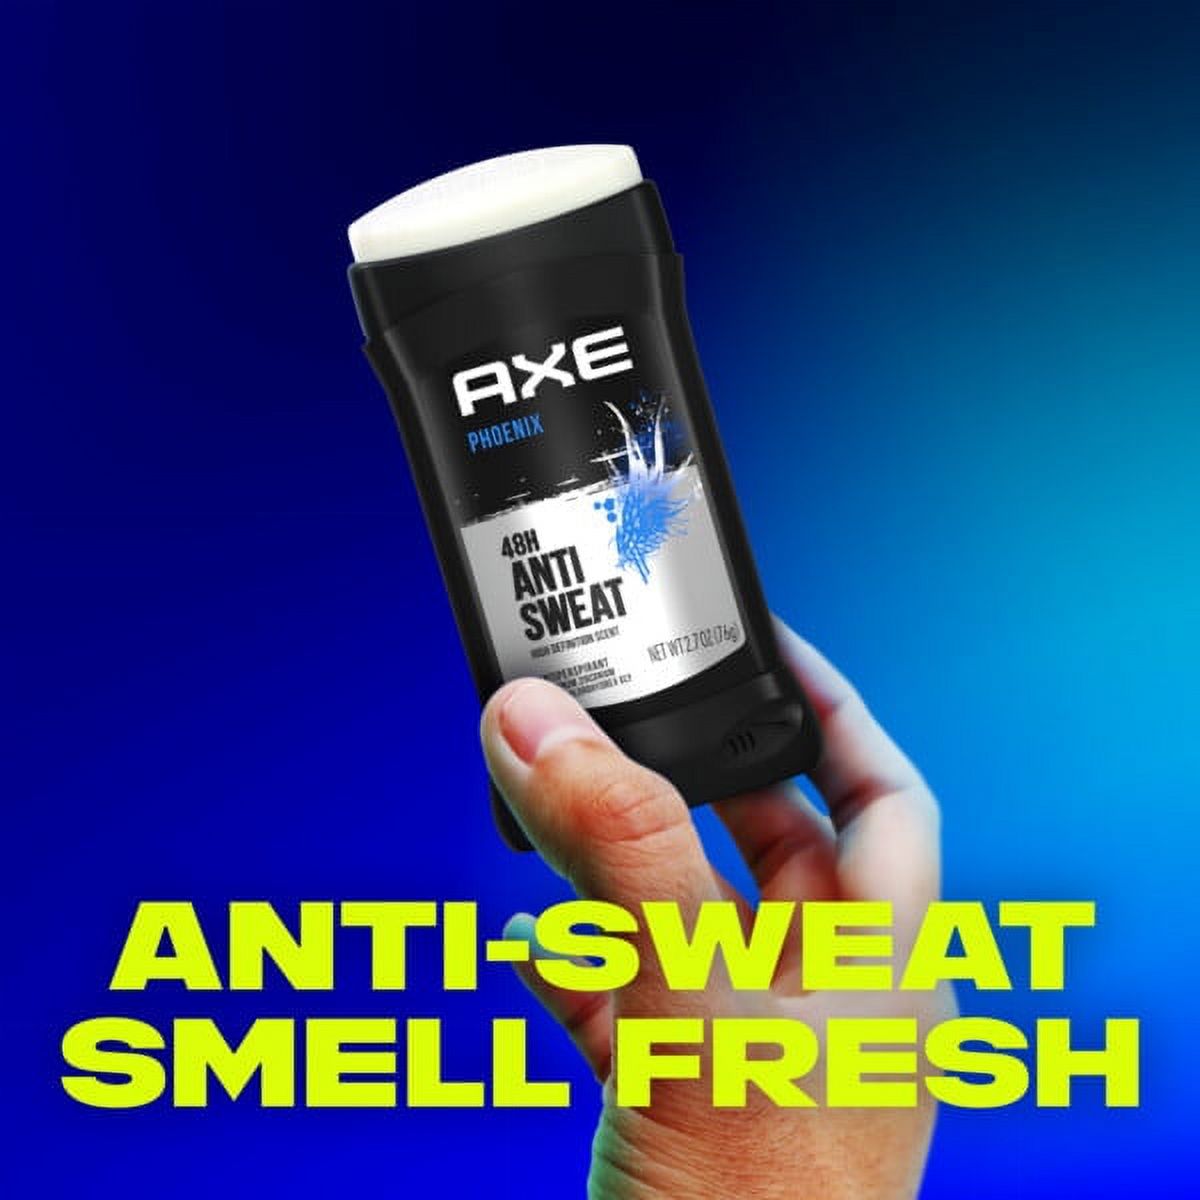 Axe Phoenix Long Lasting Antiperspirant Deodorant Stick Twin Pack, Crushed Mint and Rosemary, 2.7 oz - image 3 of 10